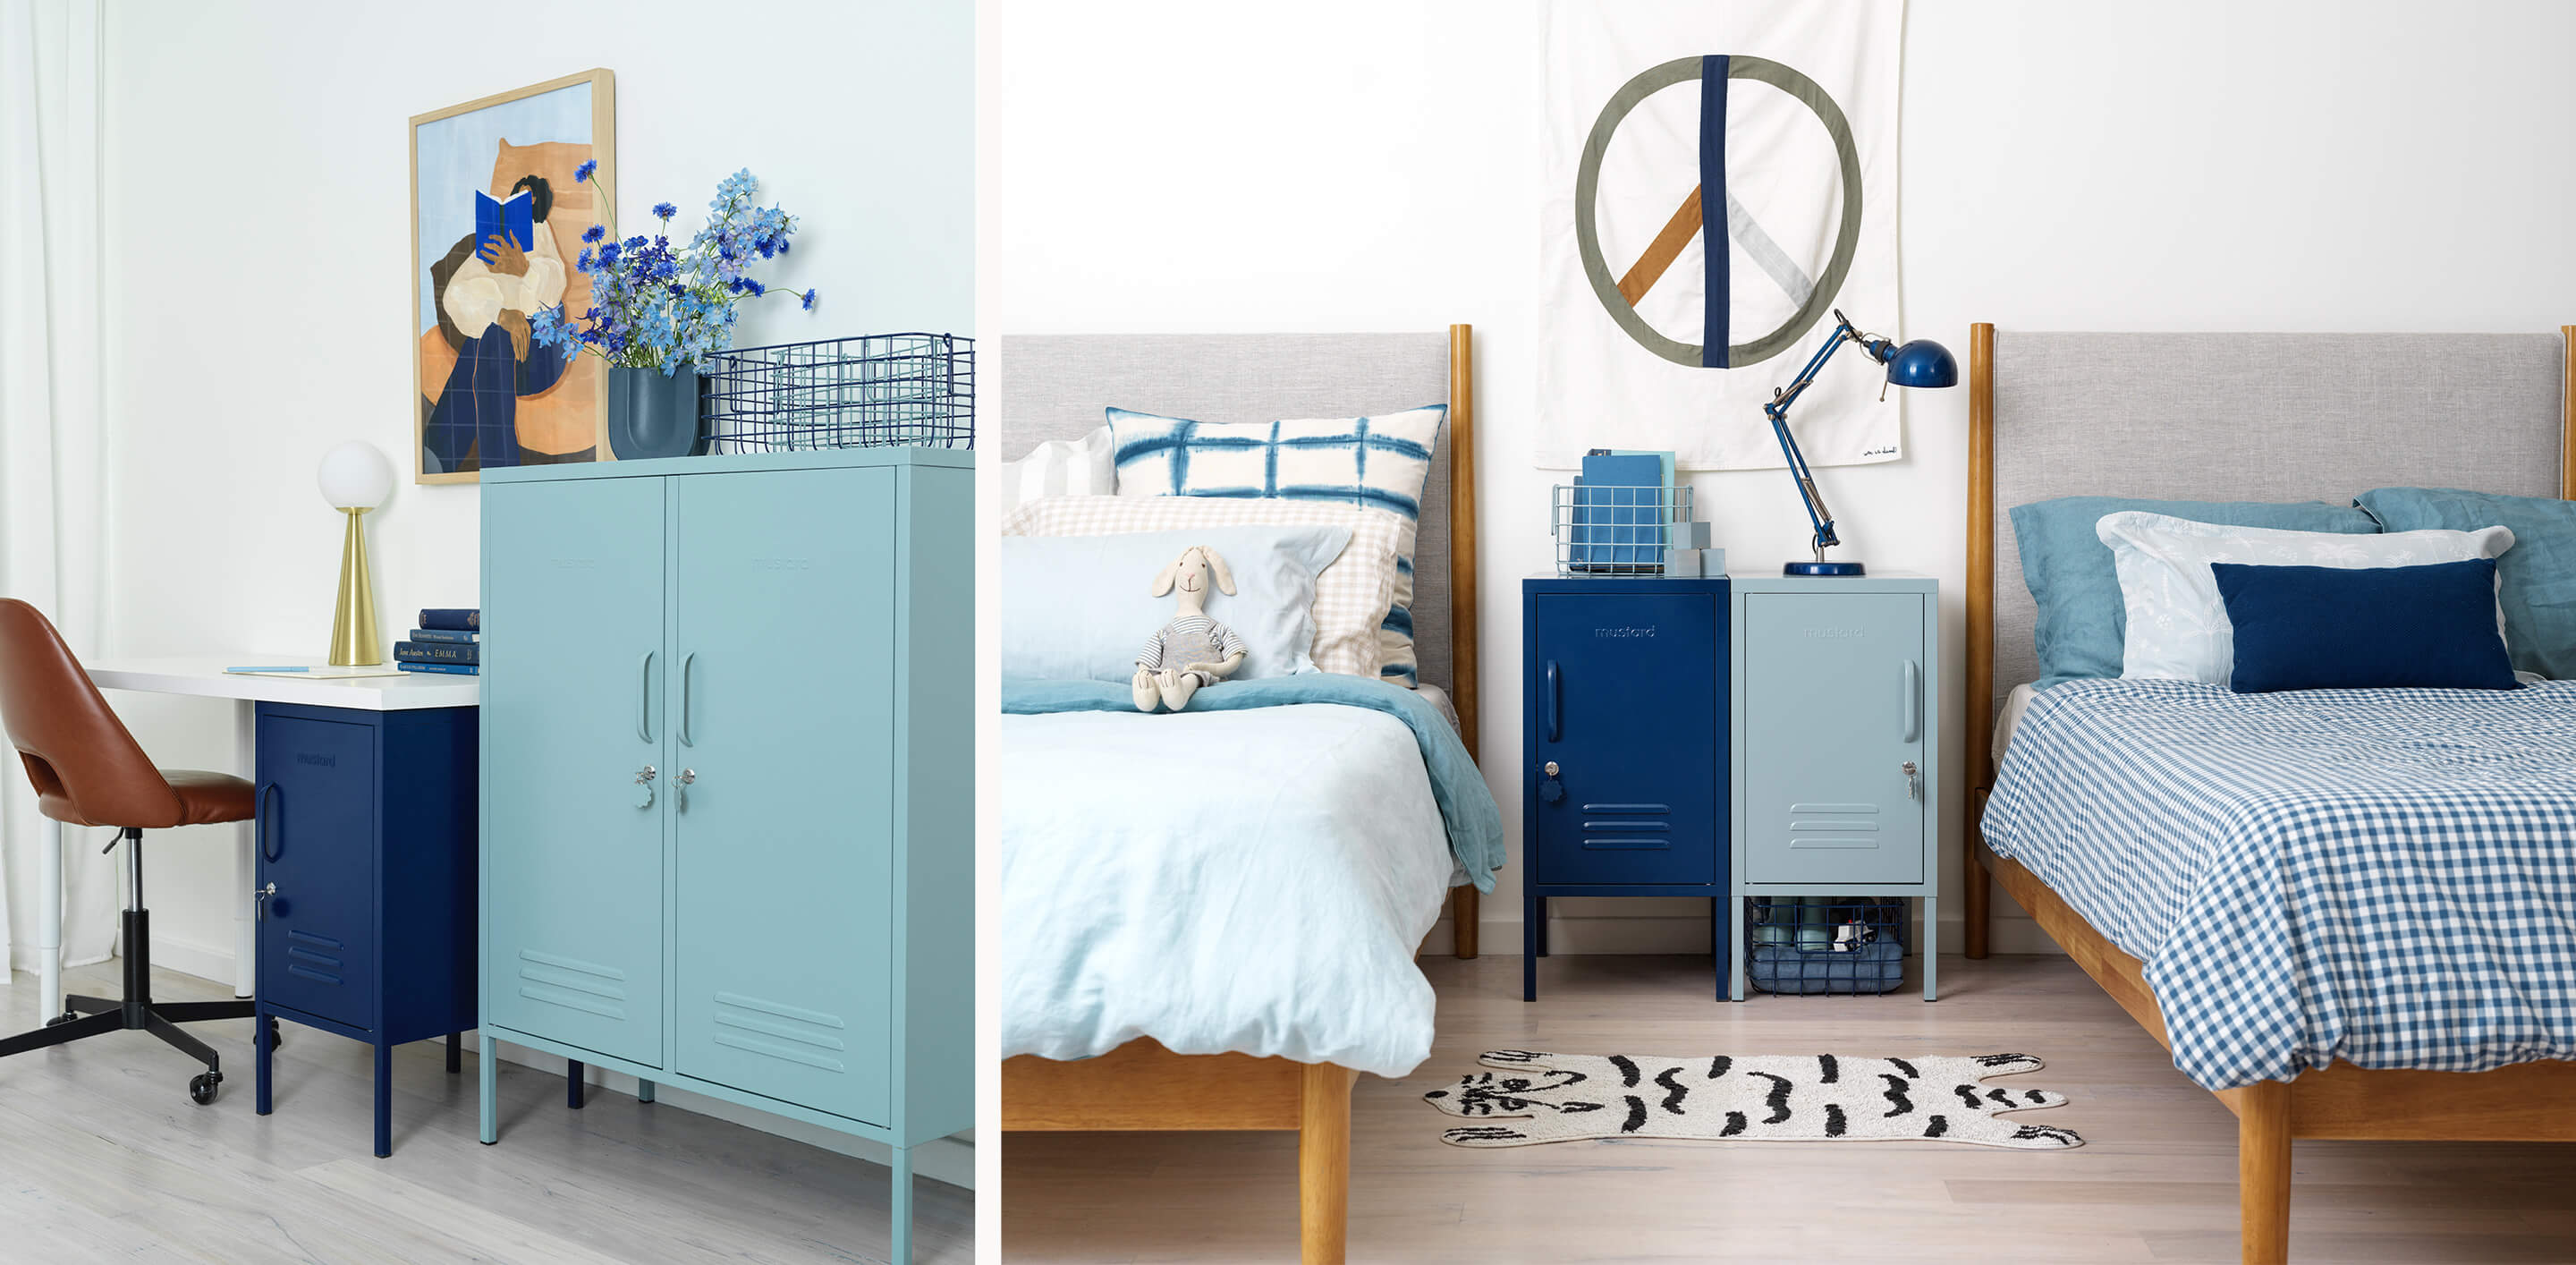 Mustard Made is all about offering you practical, yet stylish, storage solutions. Their range of lockers are super versatile, perfect for a bedroom, home office, kids room, or living spaces, they also come in a wide selection of fun and bright colours.